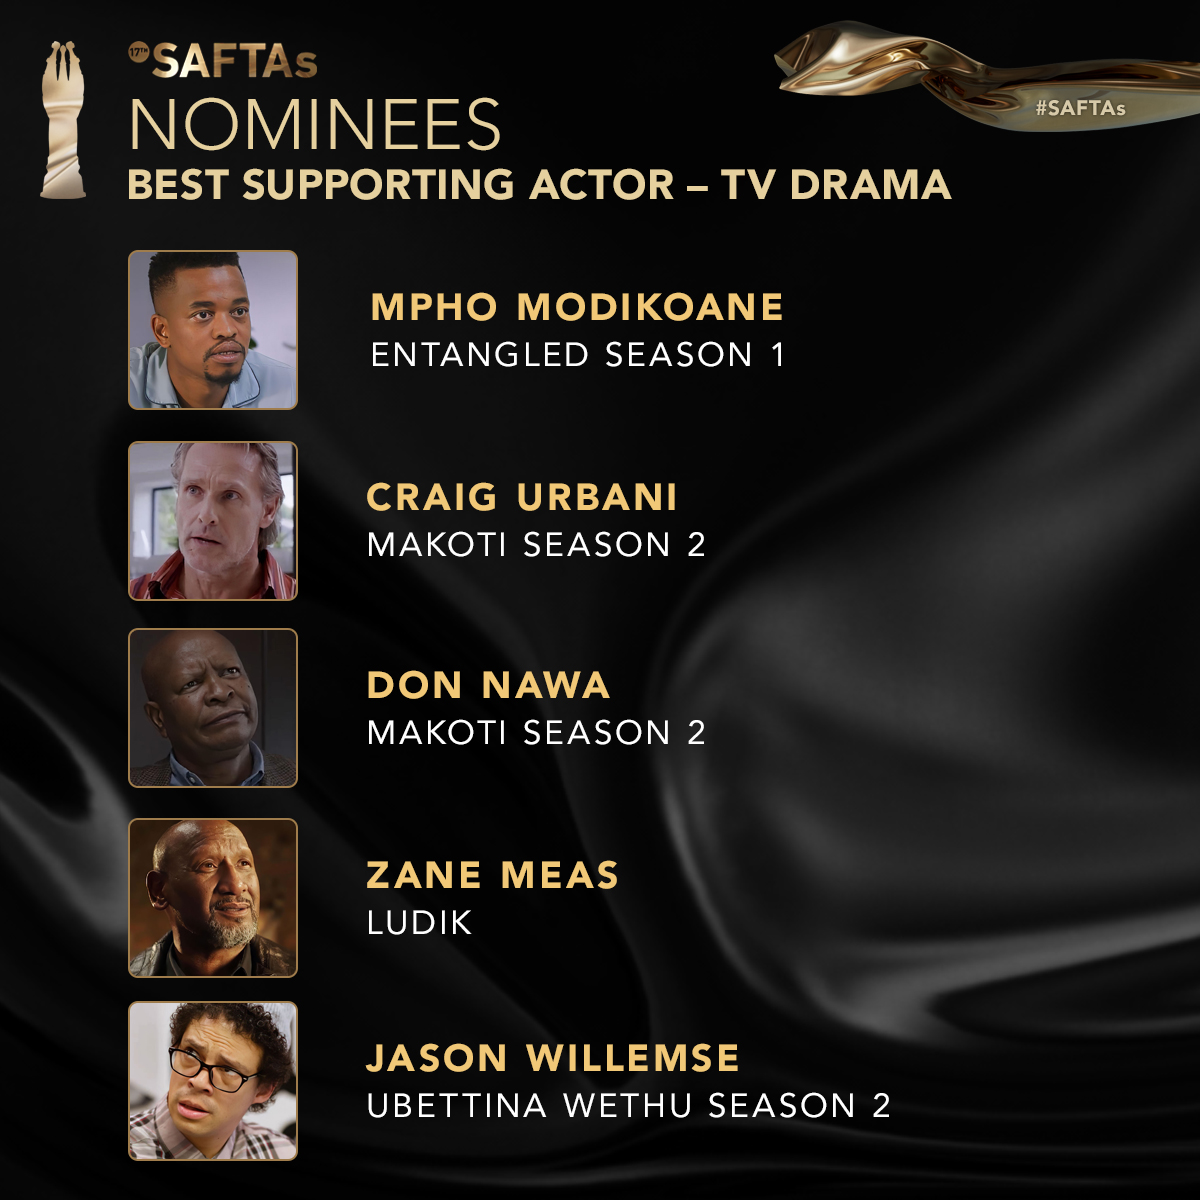 Congratulations to the nominees in the Best Supporting Actor - TV Drama category. #SAFTAs